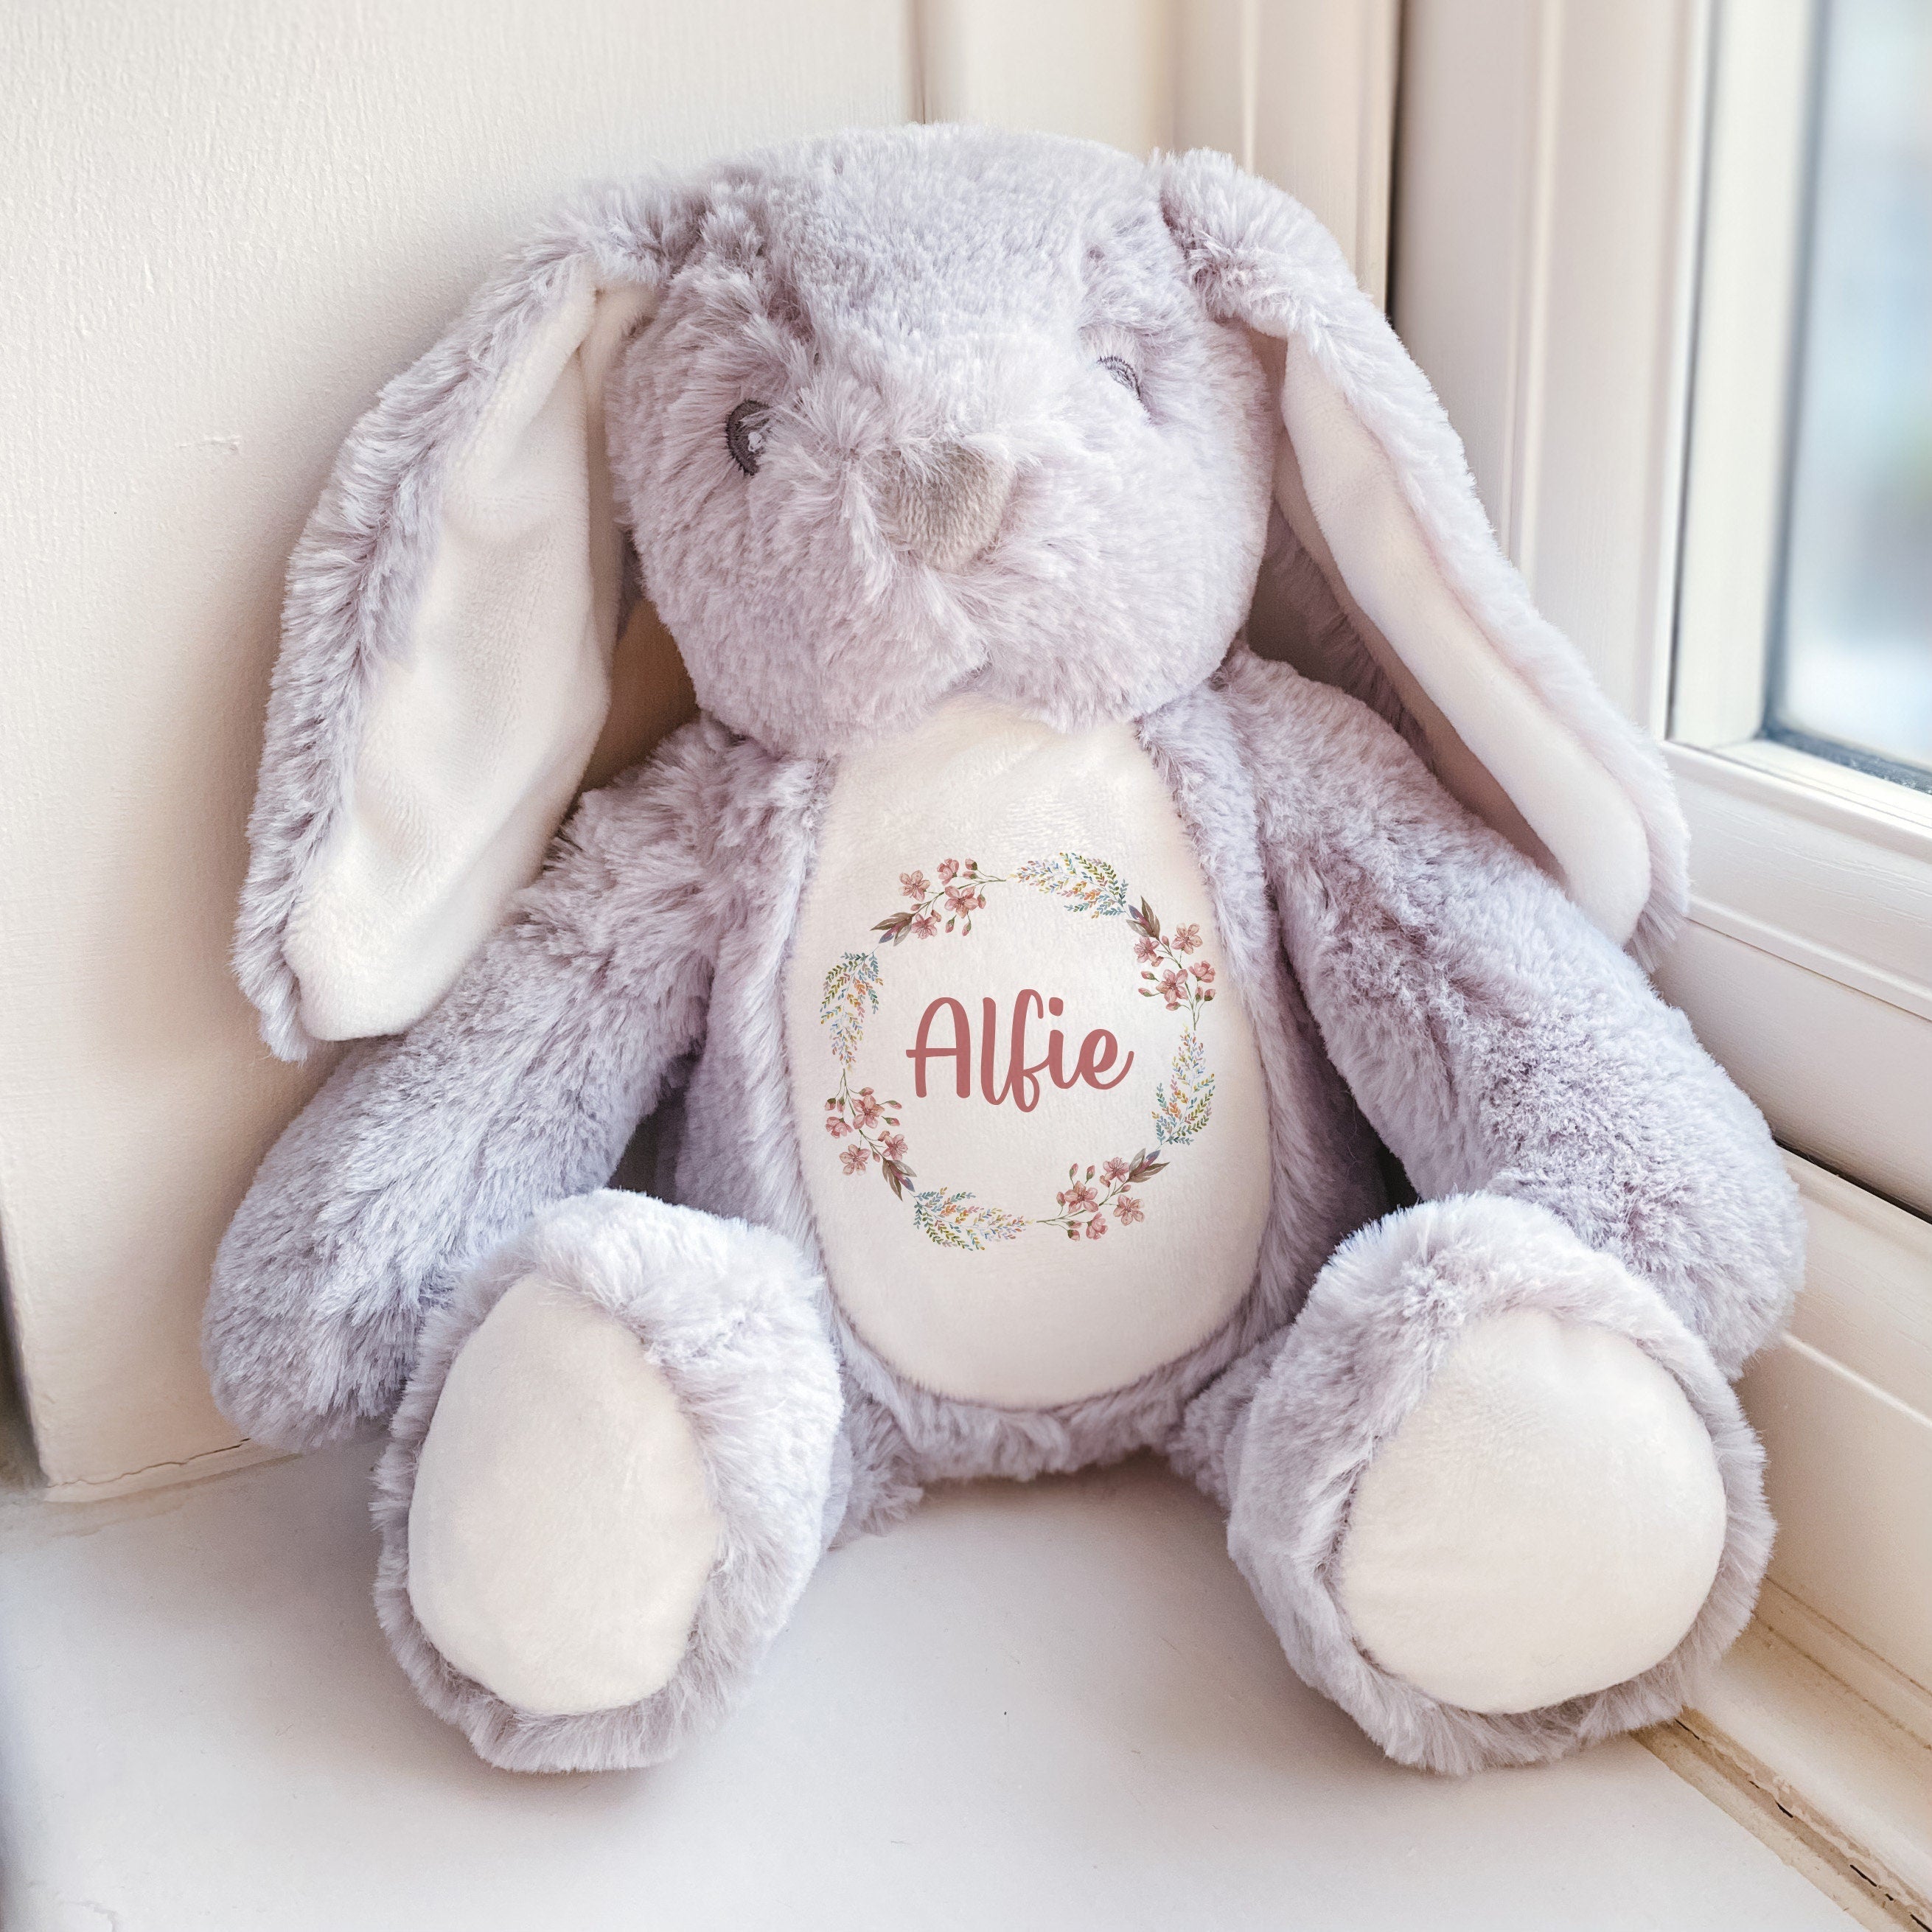 Personalised Toy With Name, Bunny Unicorn, New Baby Gift For Girls Boys, Customised Plush Soft Rabbit Teddy